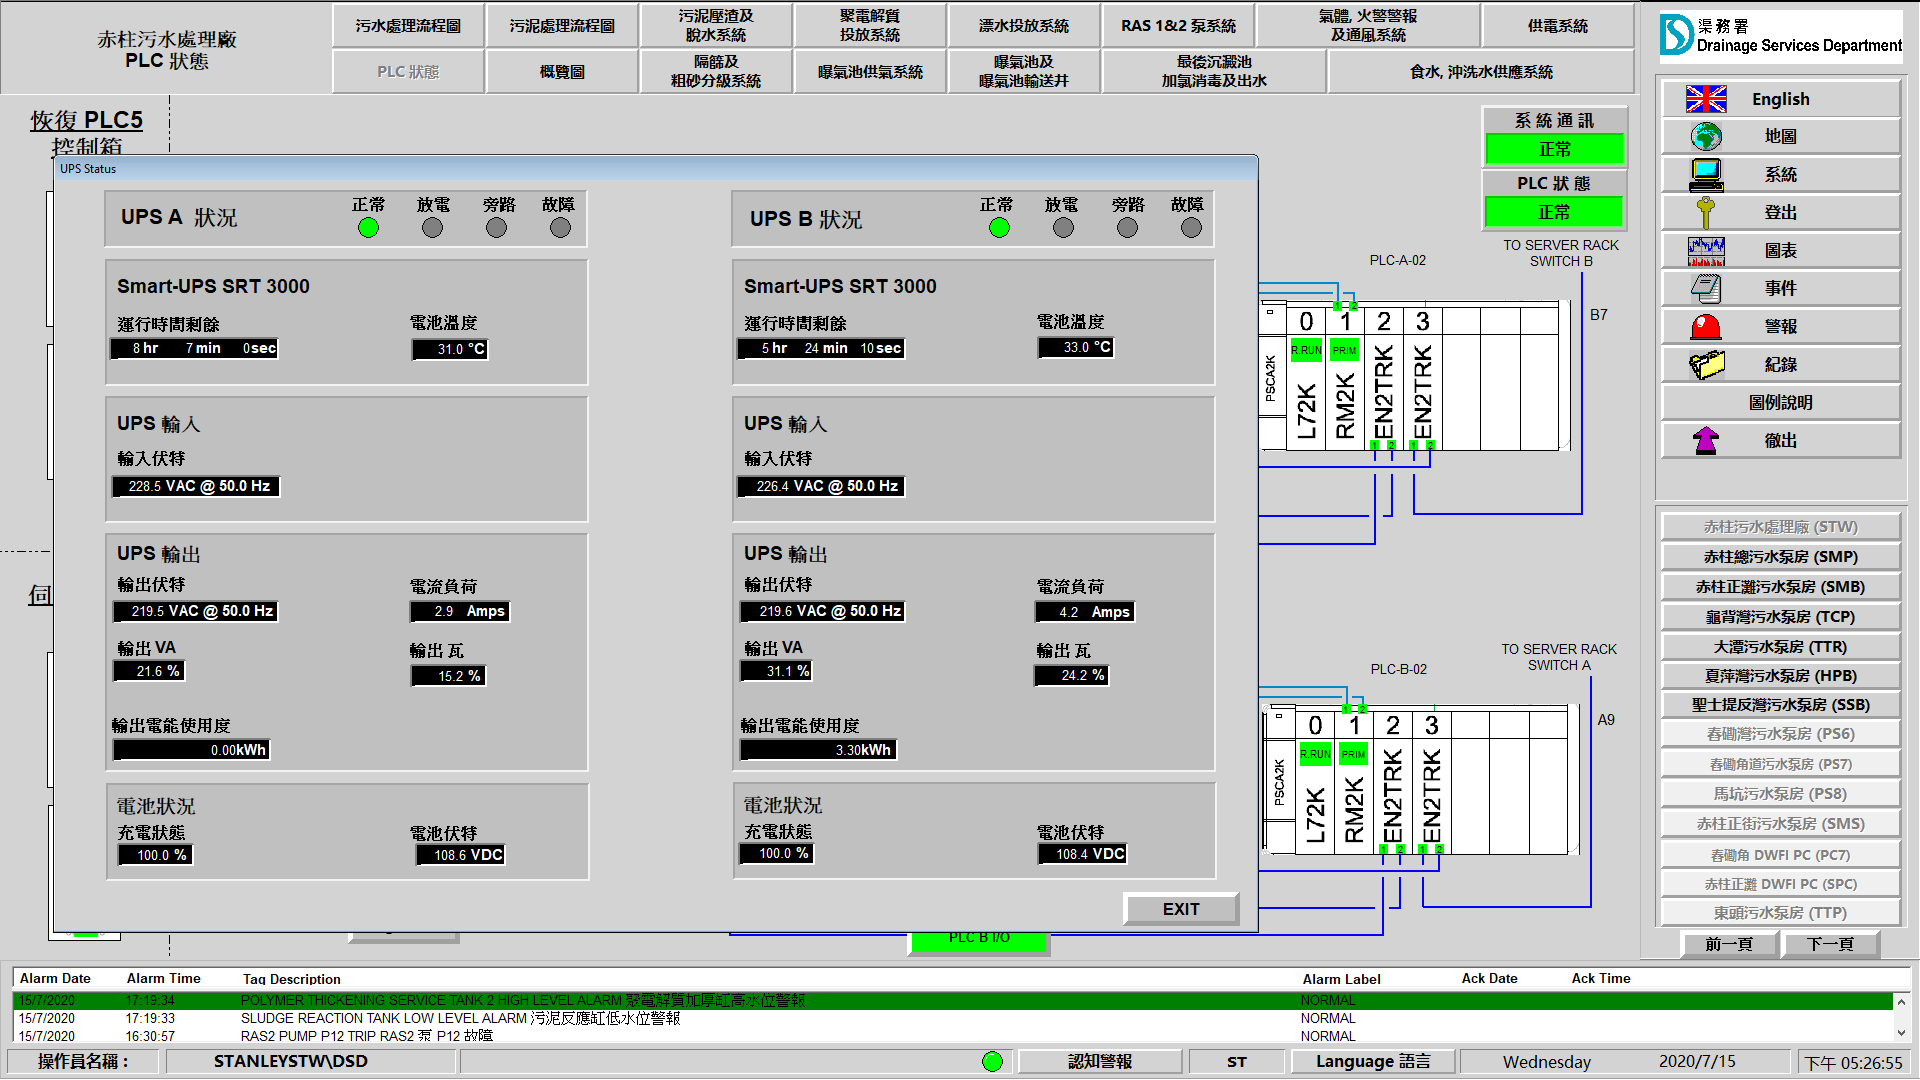 New UPS System Status screenshot from FactoryTalk View After Works in DSD Stanley STW